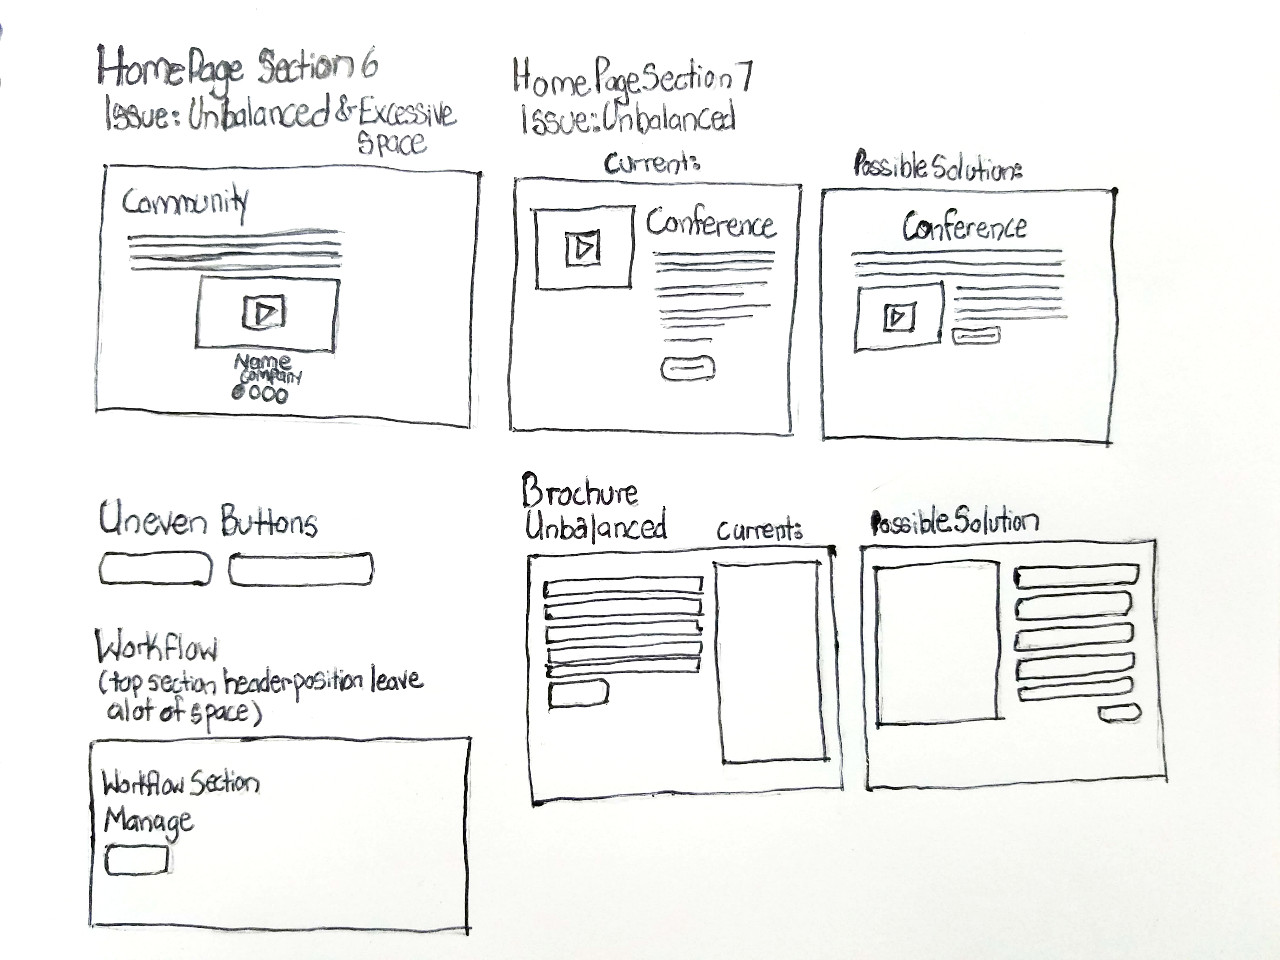 Sketch of issues on the home page and solutions from a website audit by Katherine Delorme.